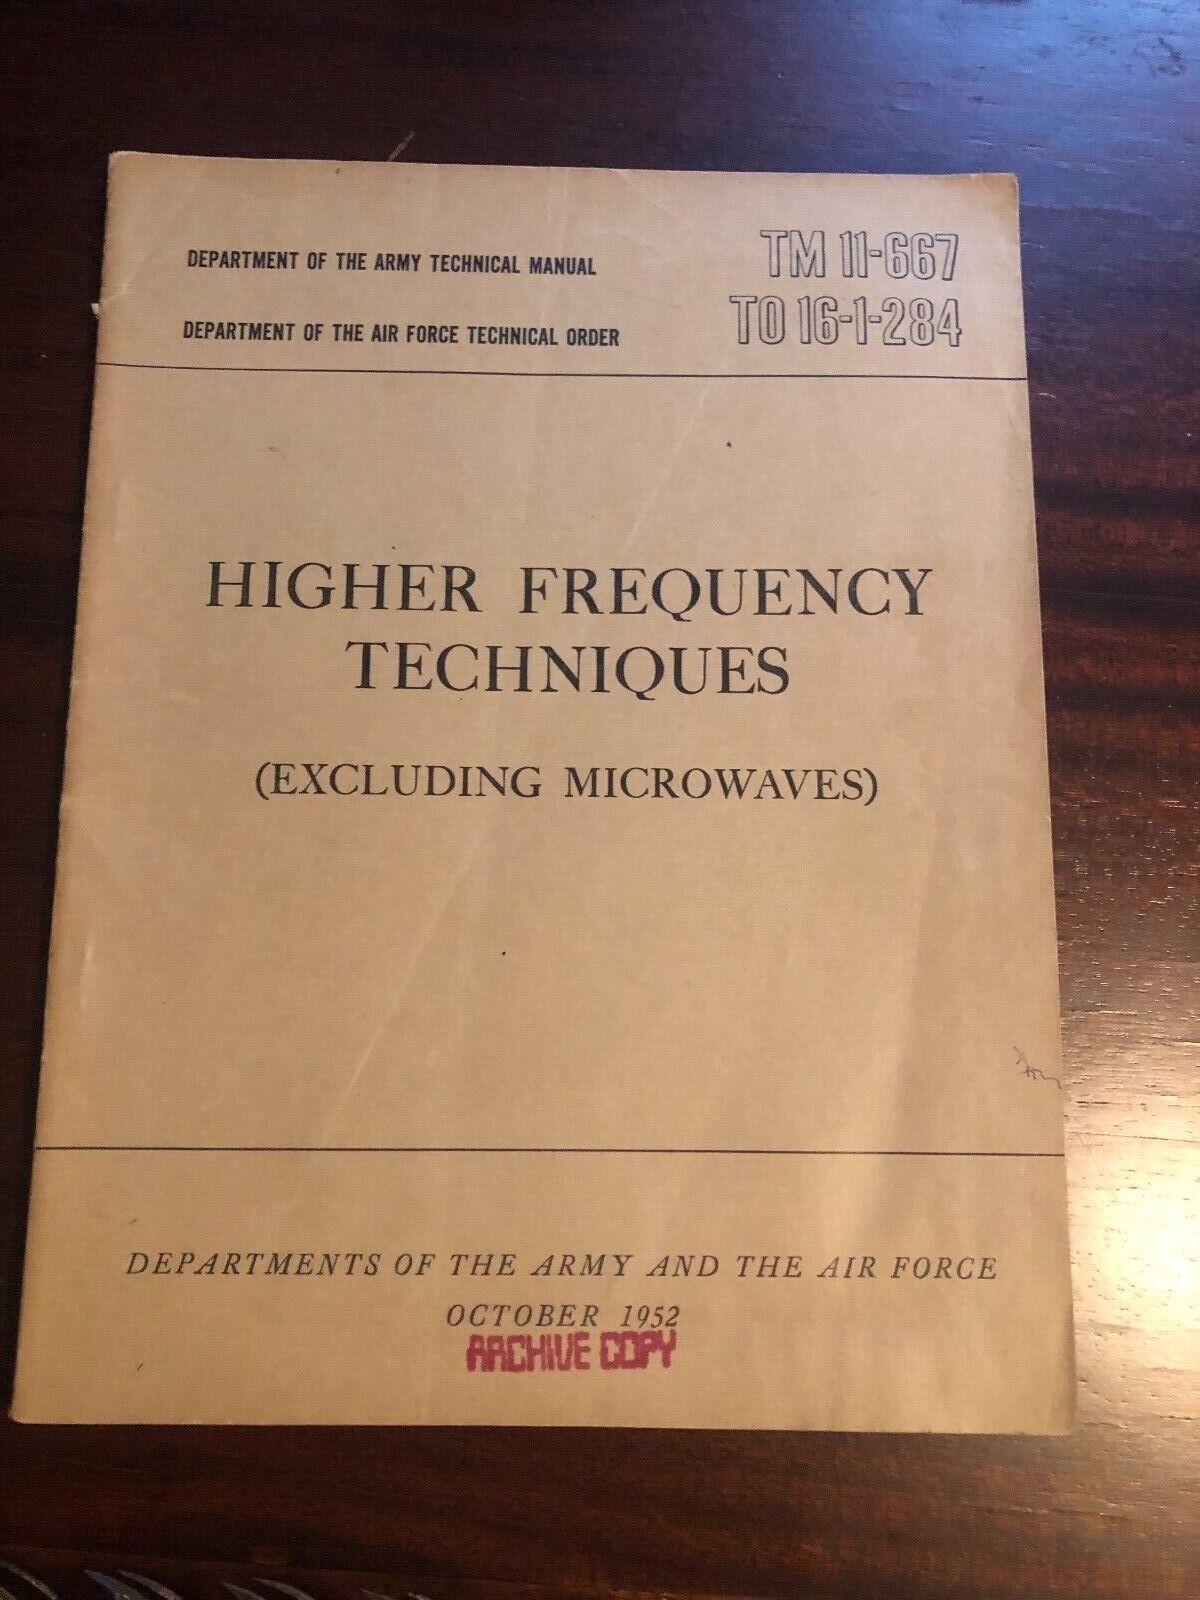 Higher Frequency Techniques (Excluding Microwaves) TM 11-667 October 1952